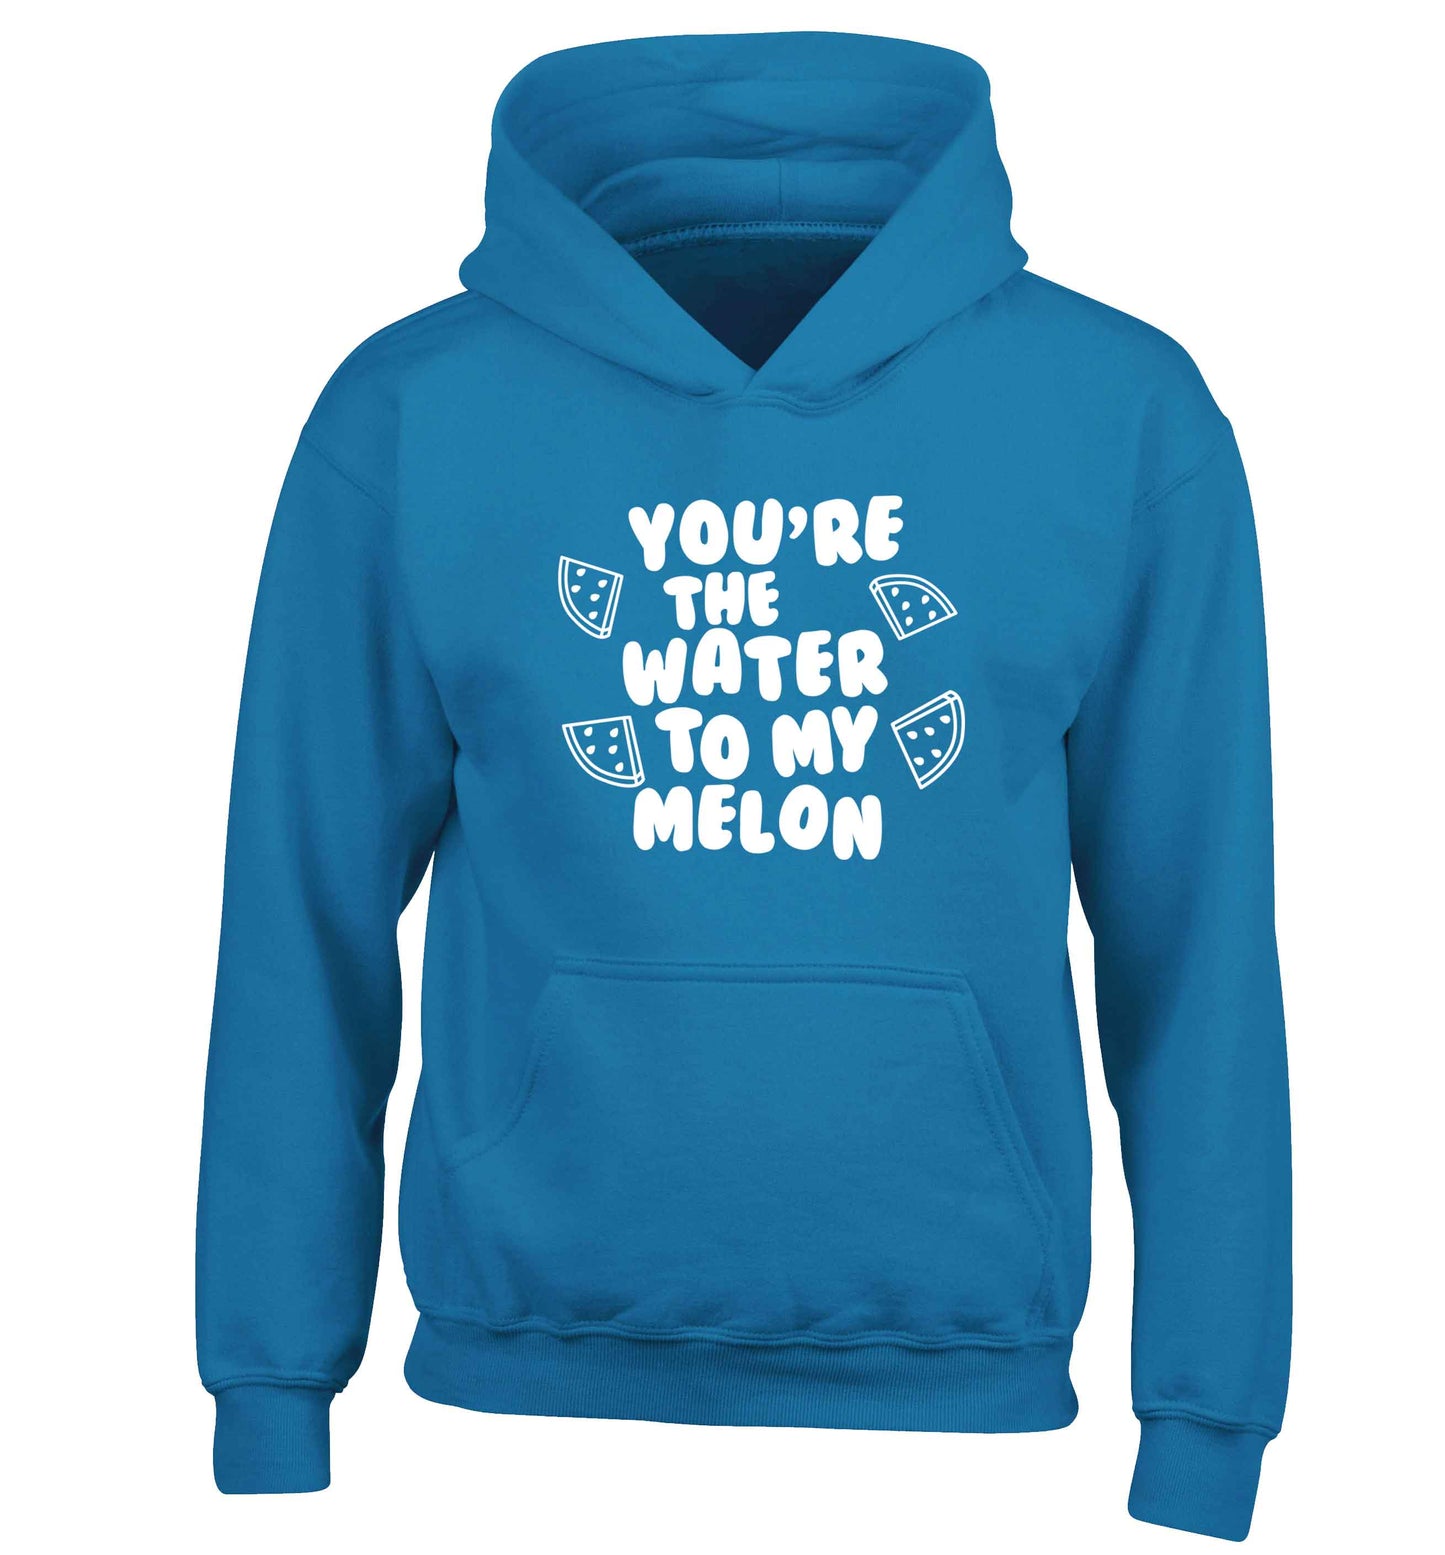 You're the water to my melon children's blue hoodie 12-13 Years